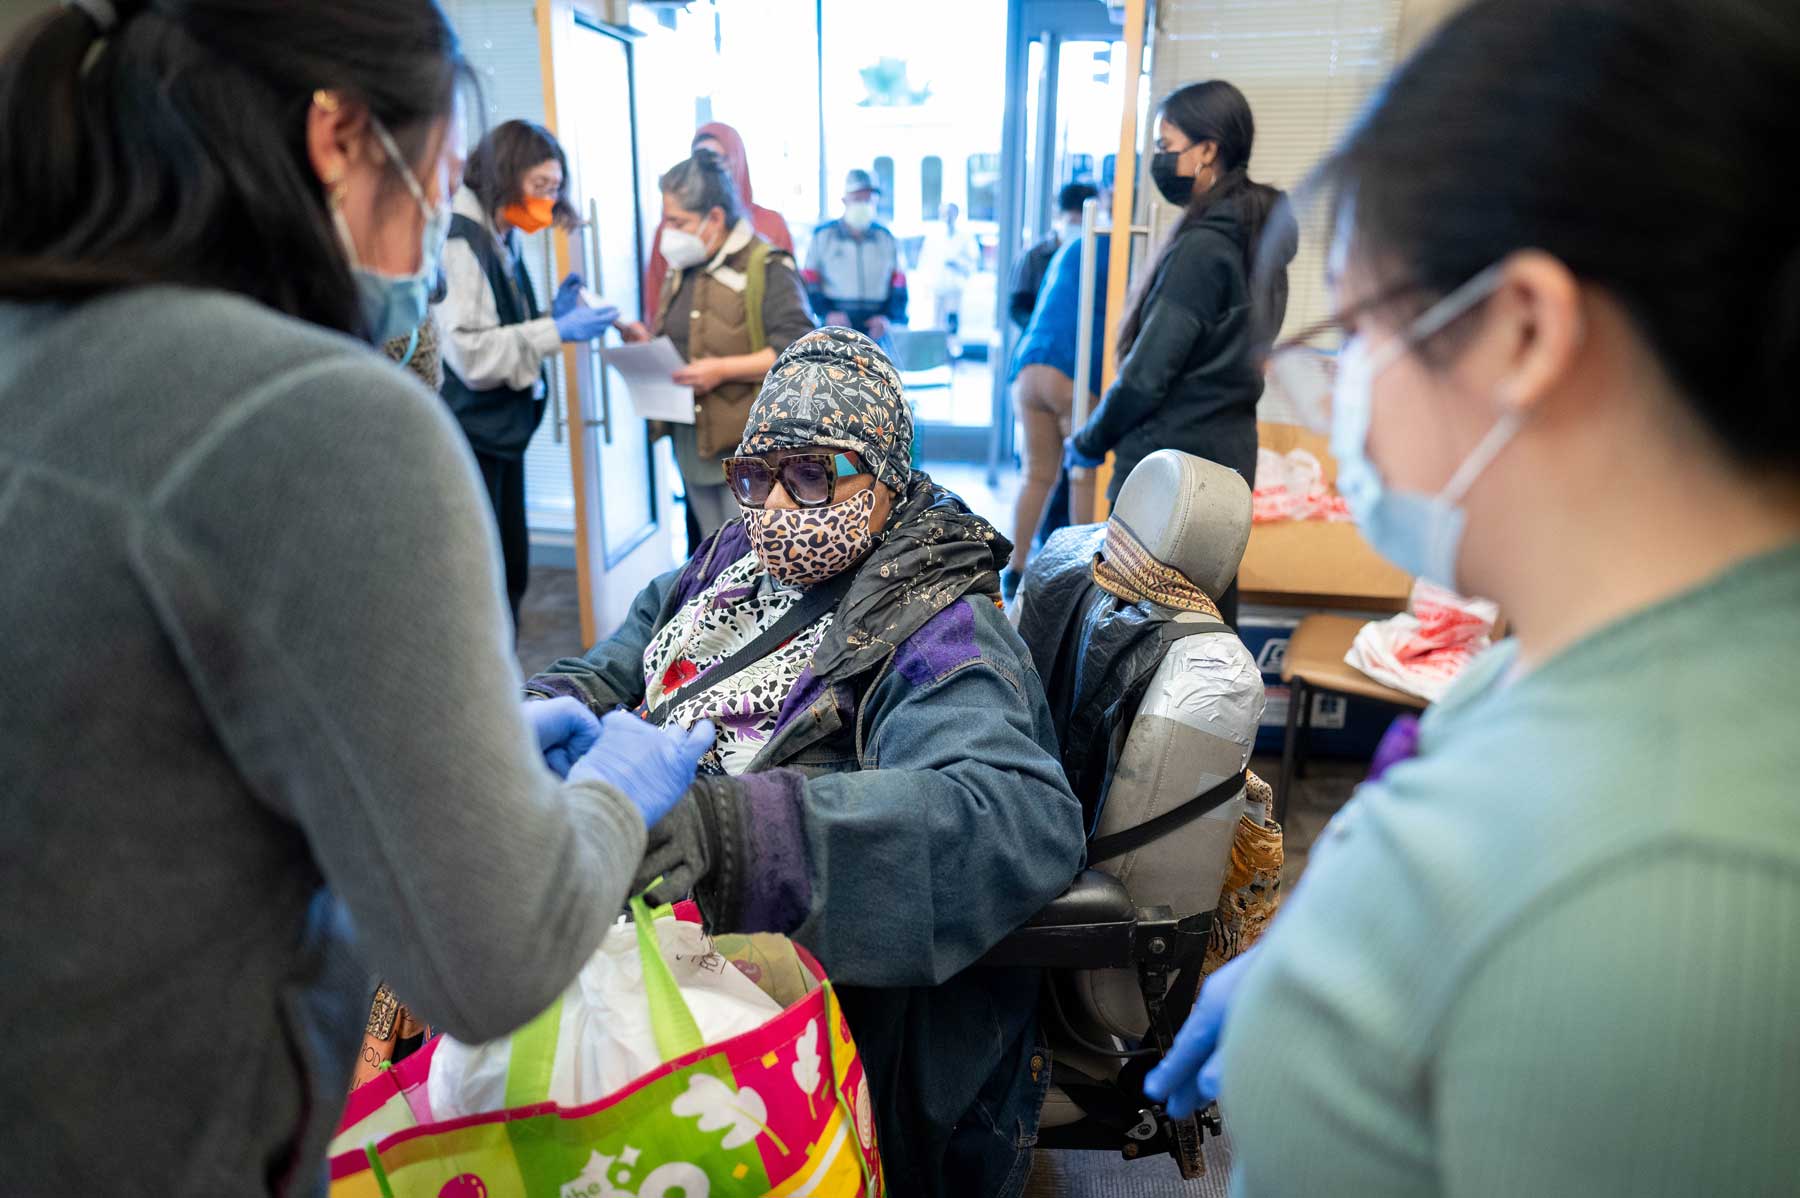 A woman in a wheelchair receives a bag full of food.